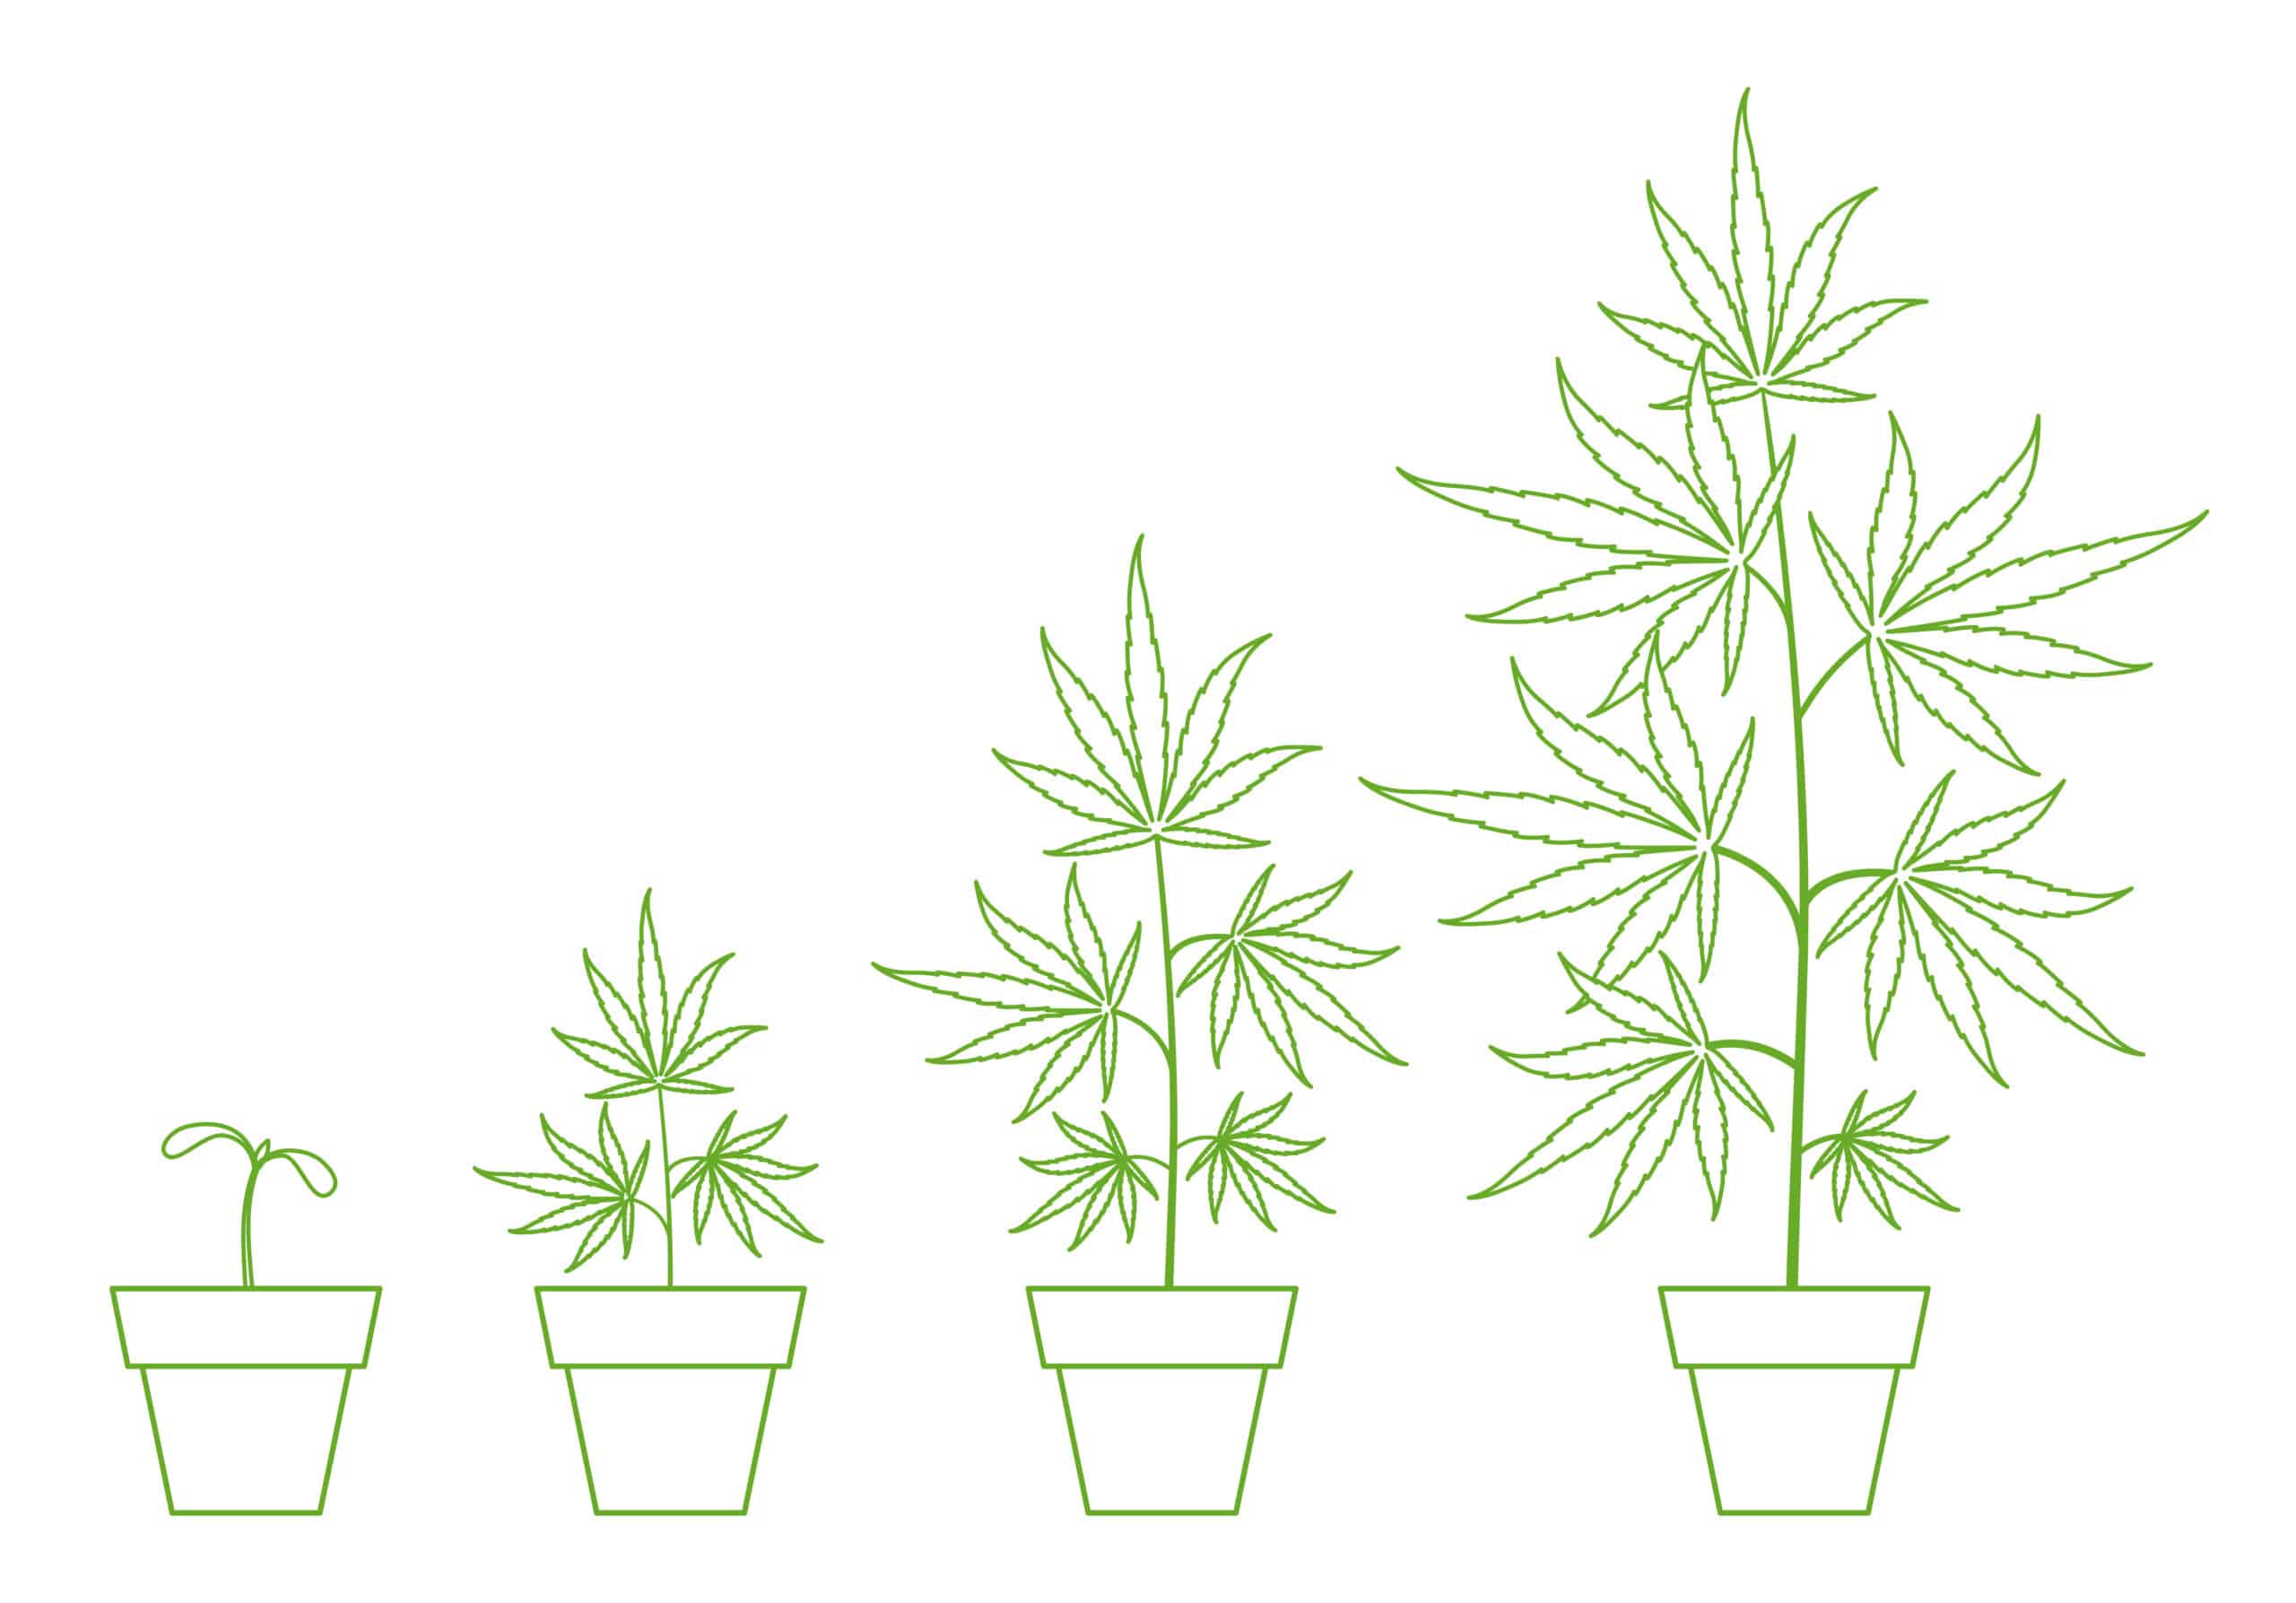 Vector graphic of marijuana plants at different growth stages